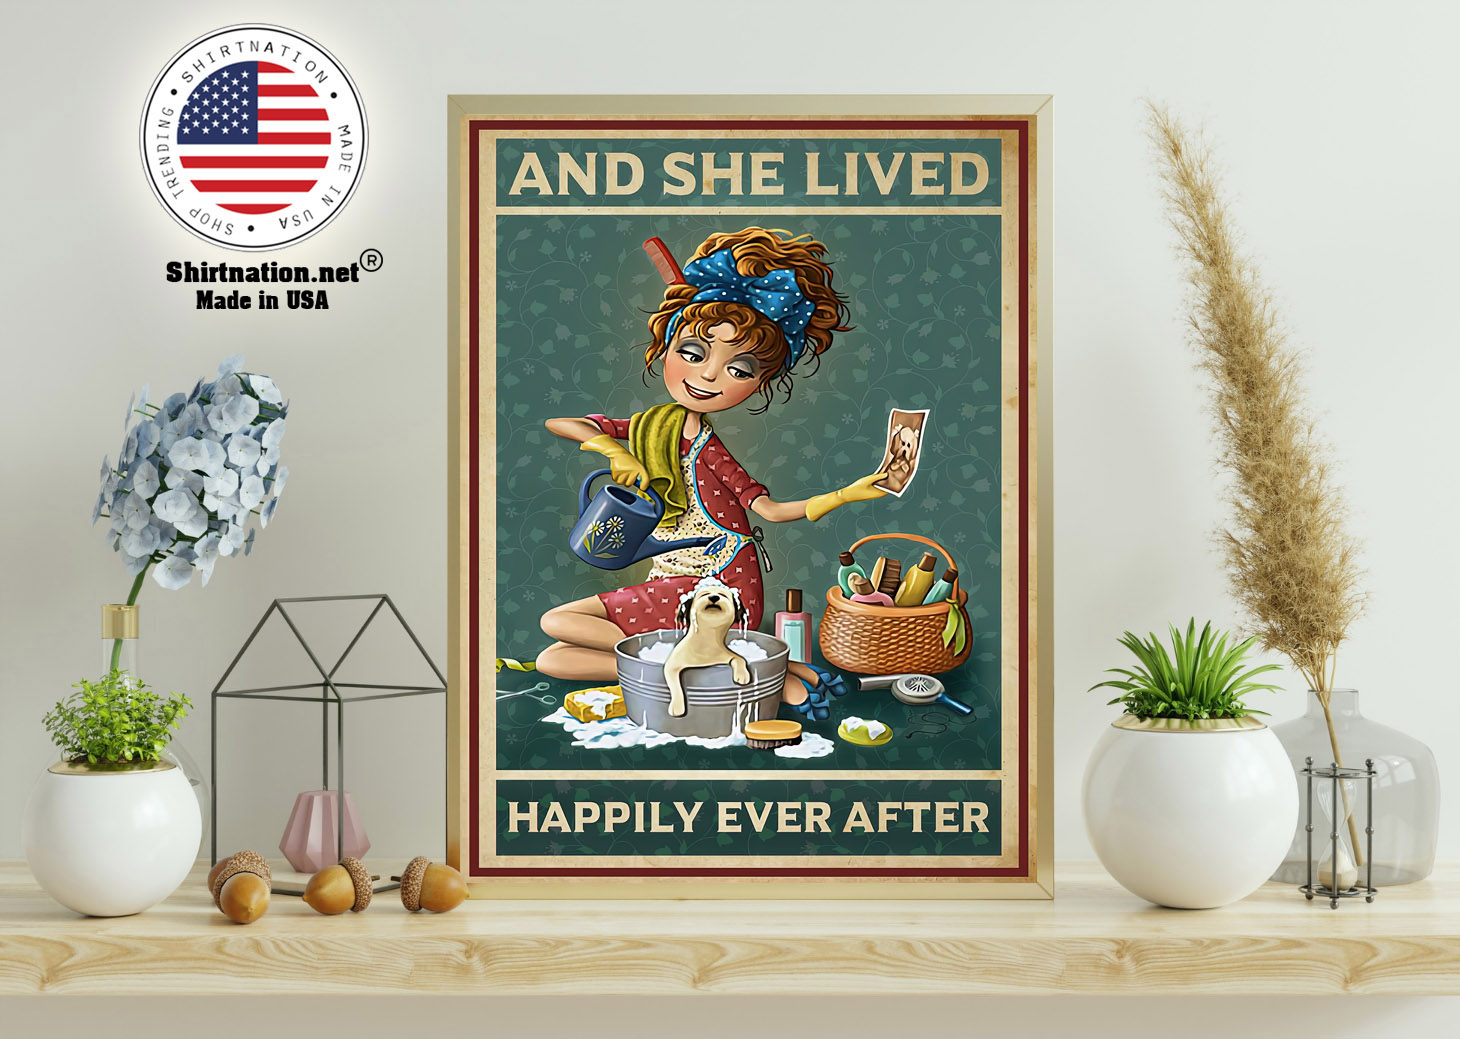 Grooming And she lived happily ever after poster 11